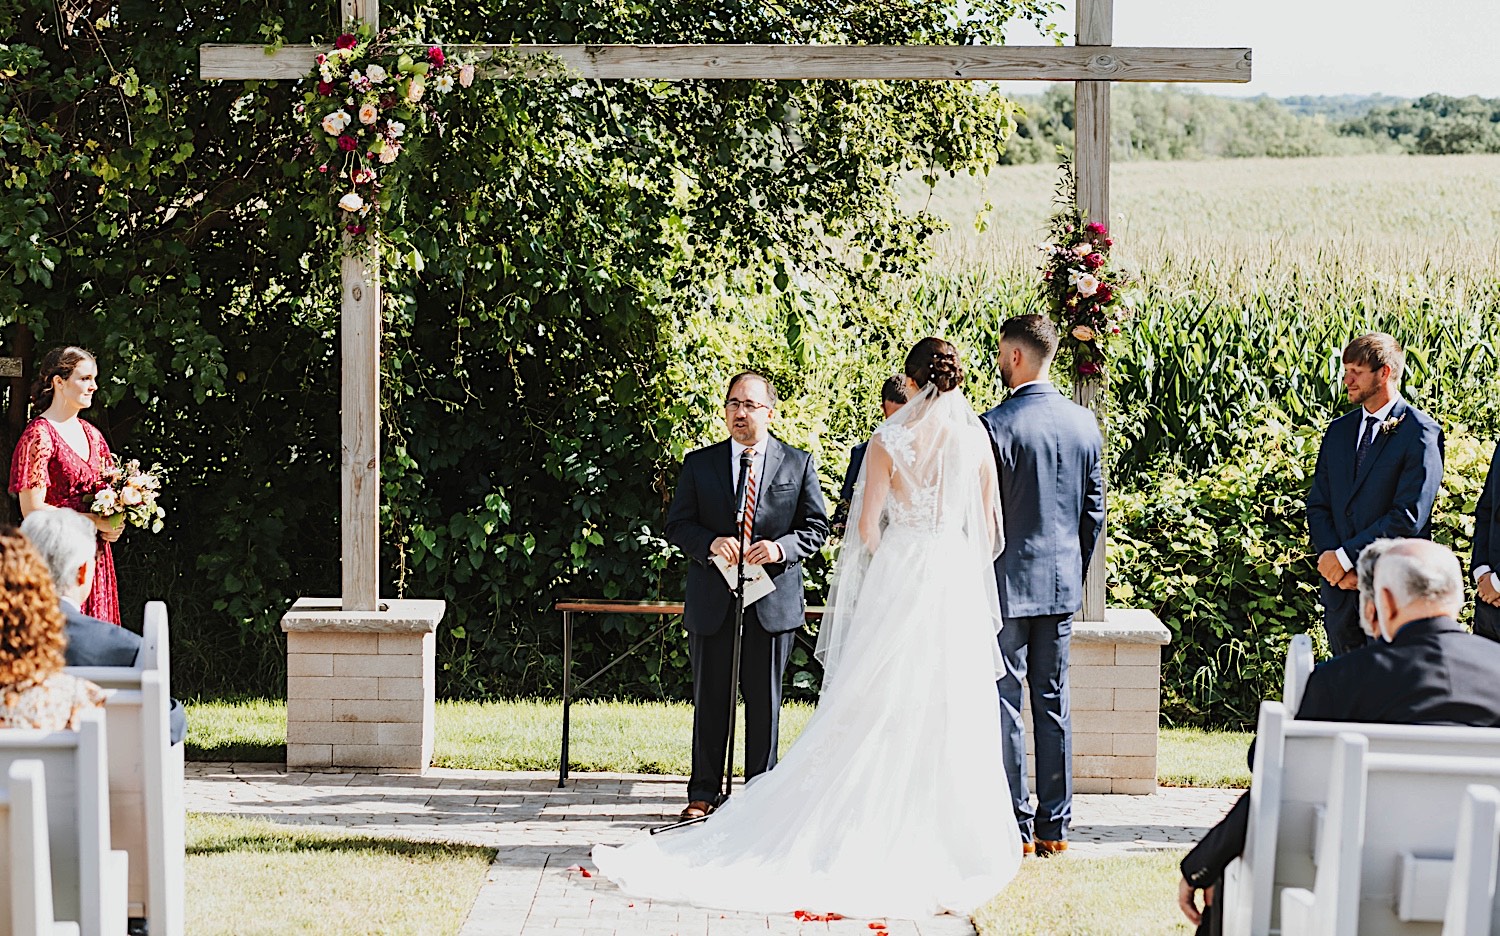 An officiant speaks during an outdoor wedding ceremony while the bride and groom stand side by side at their wedding venue Legacy Hill Farm